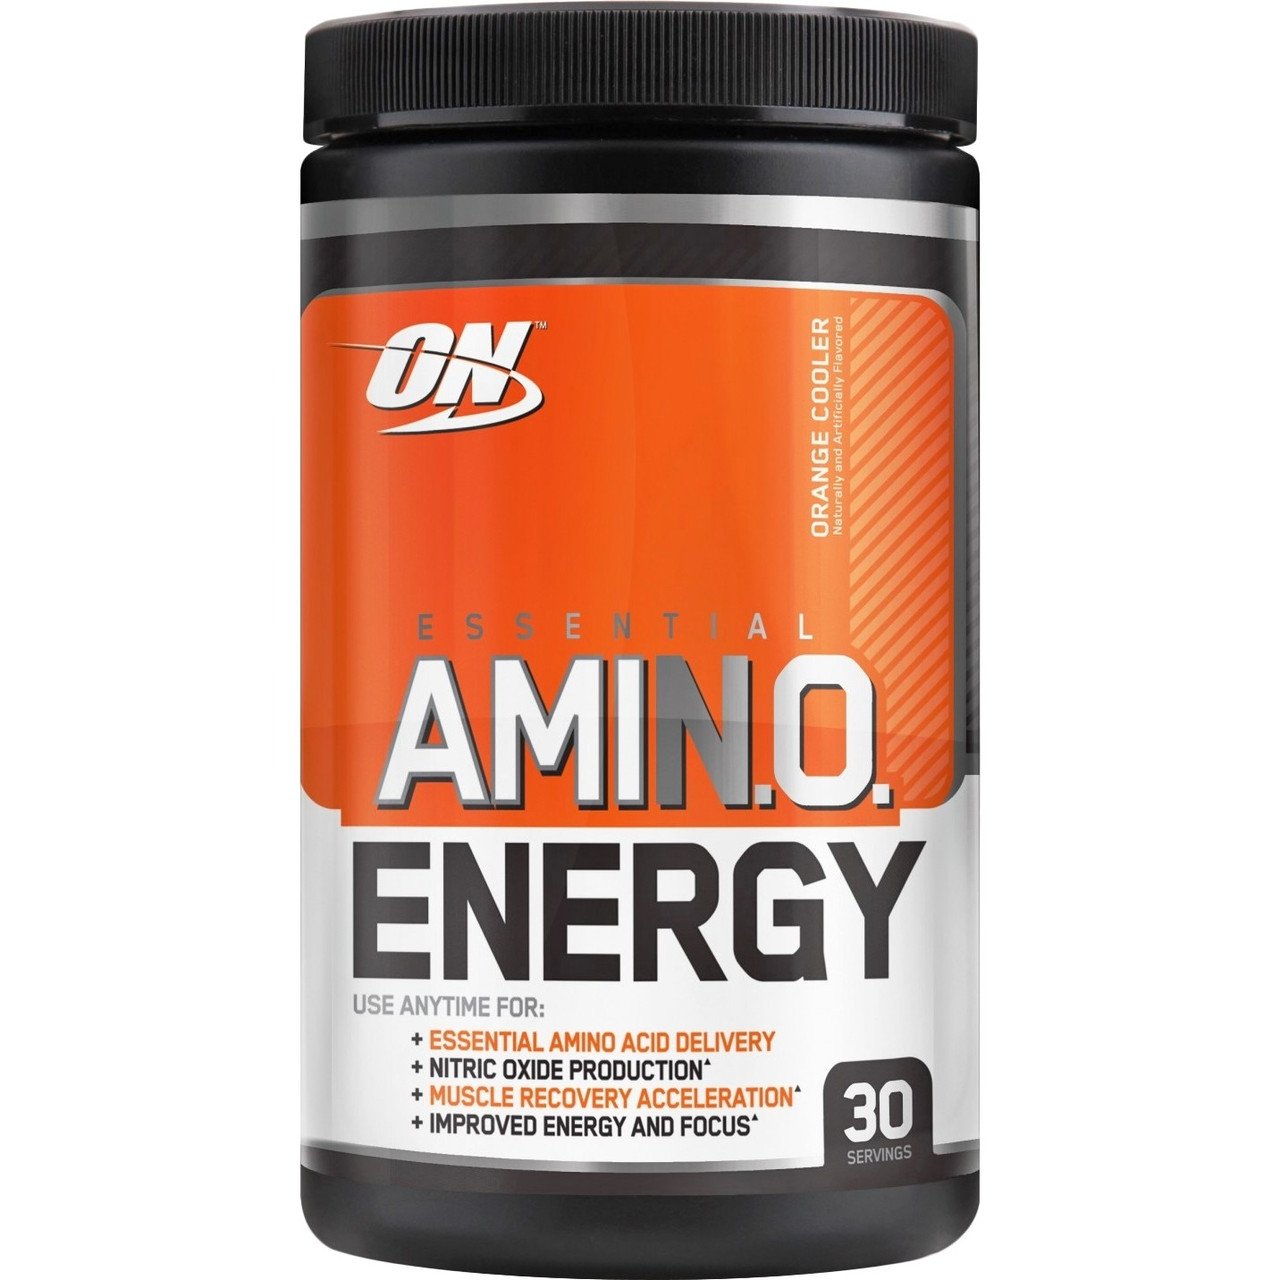 Amino Energy Optimum Nutrition,  ml, Optimum Nutrition. Post Workout. recovery 